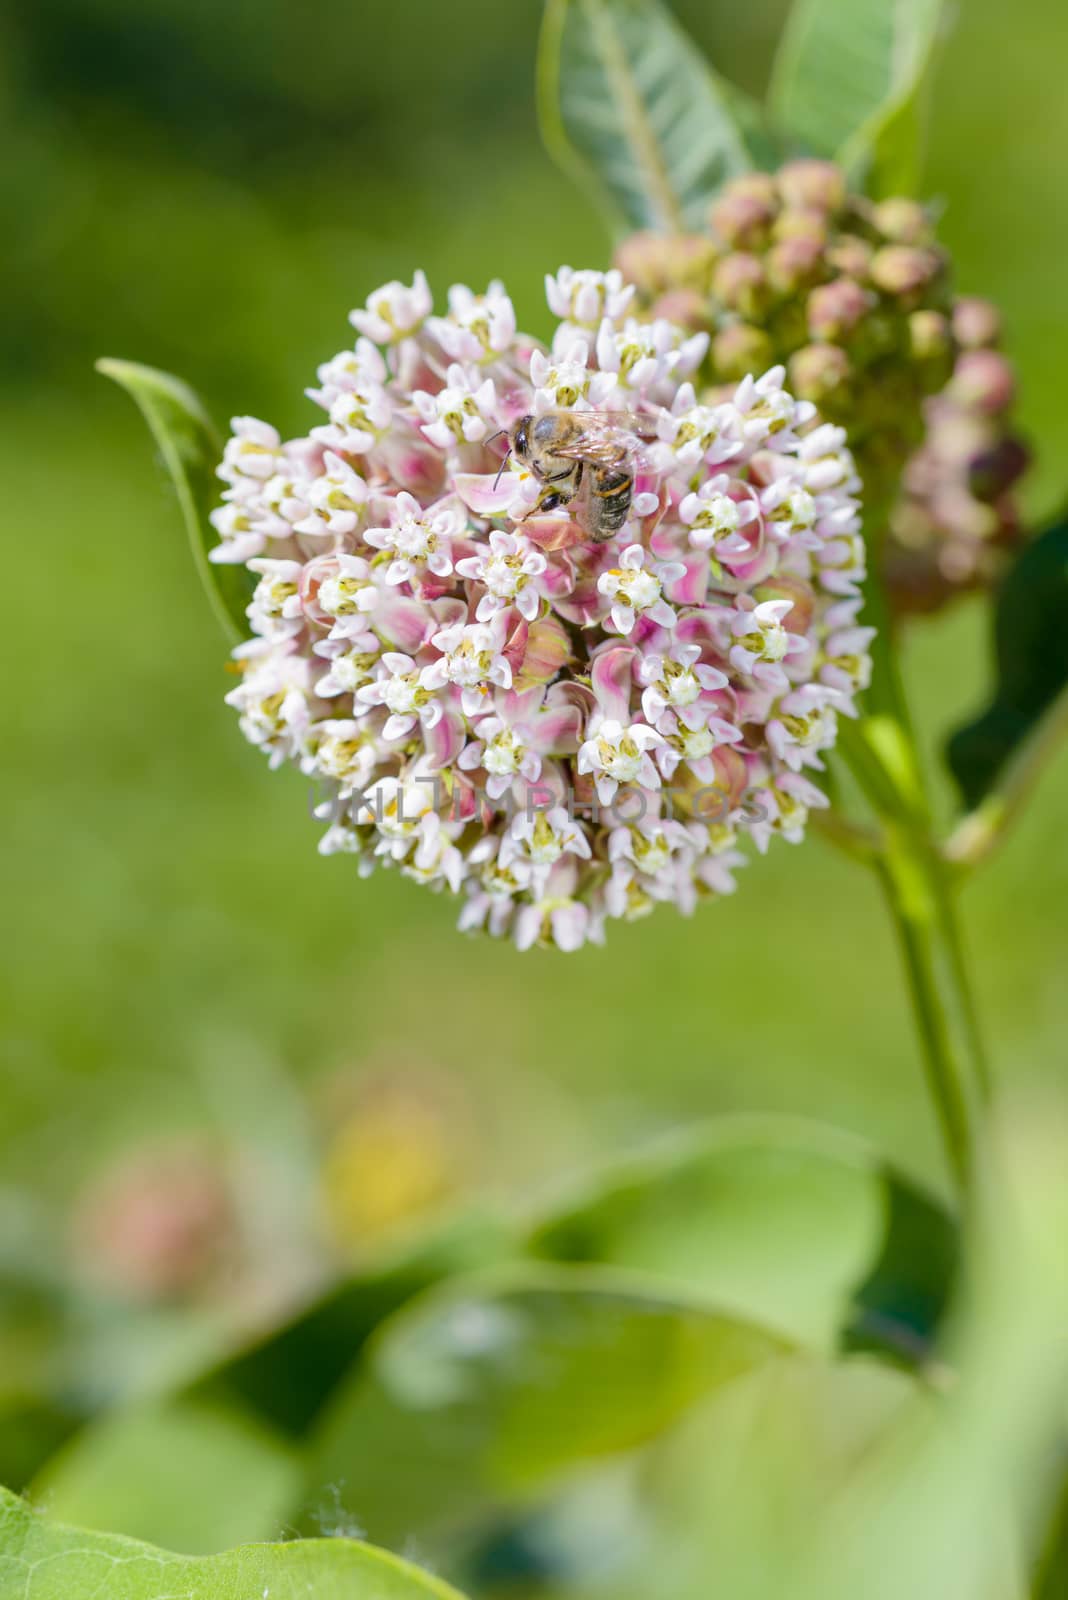 Macro of a pink and white Milkweed flower with a foraging bee in the meadow under the warm spring sun